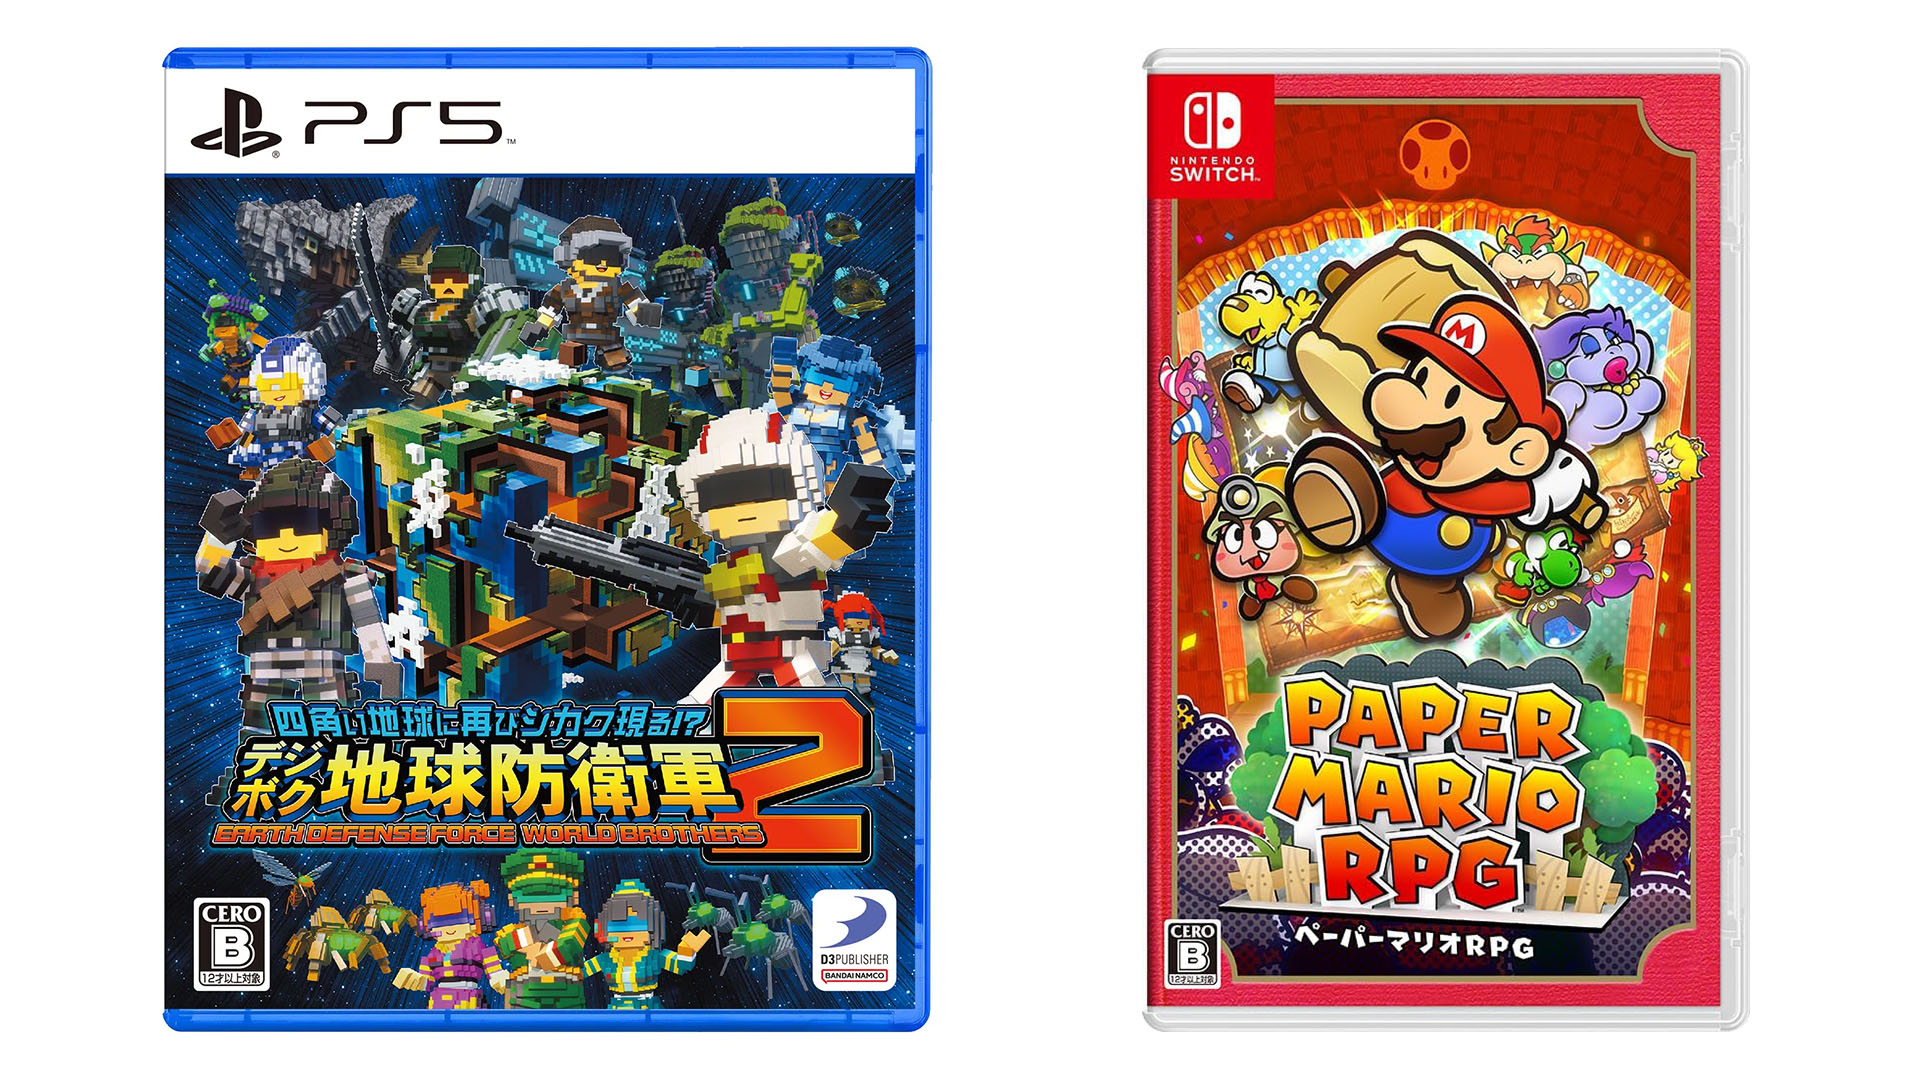 This Week’s Japanese Game Releases: Earth Defense Force: World Brothers 2, Paper Mario: The Thousand-Year Door, more